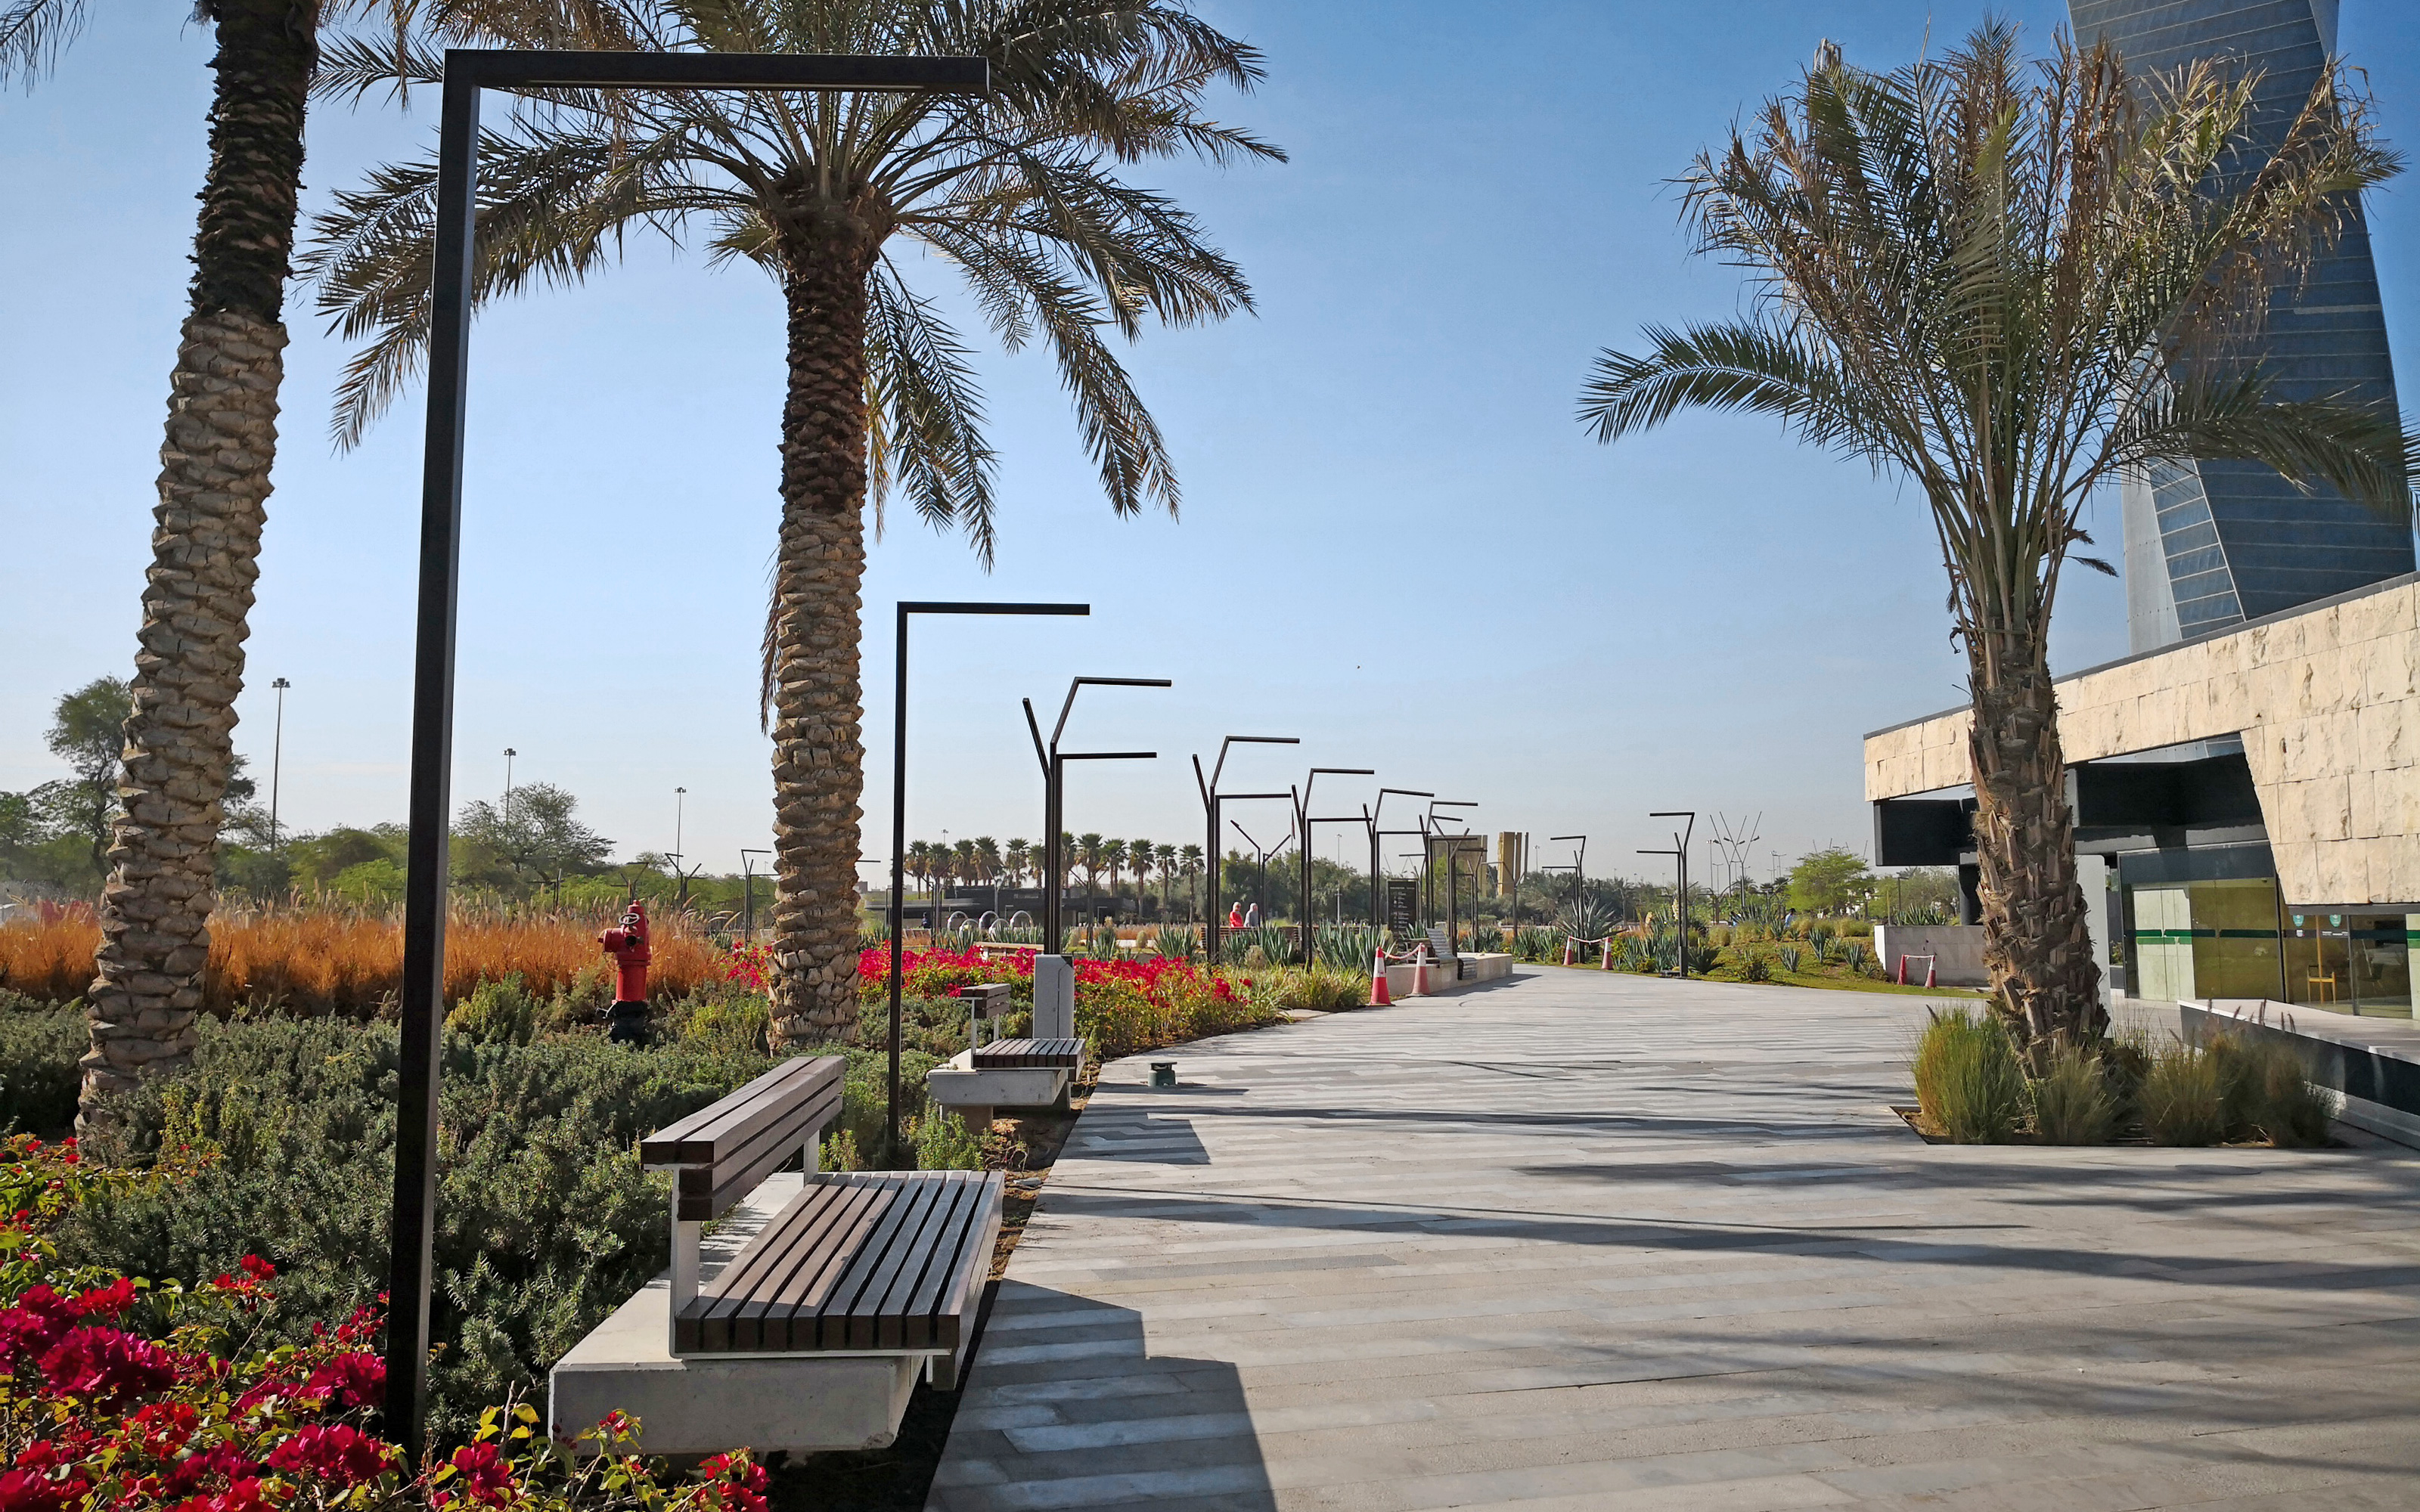 Walkways with benches, plant beds and palm trees in a park